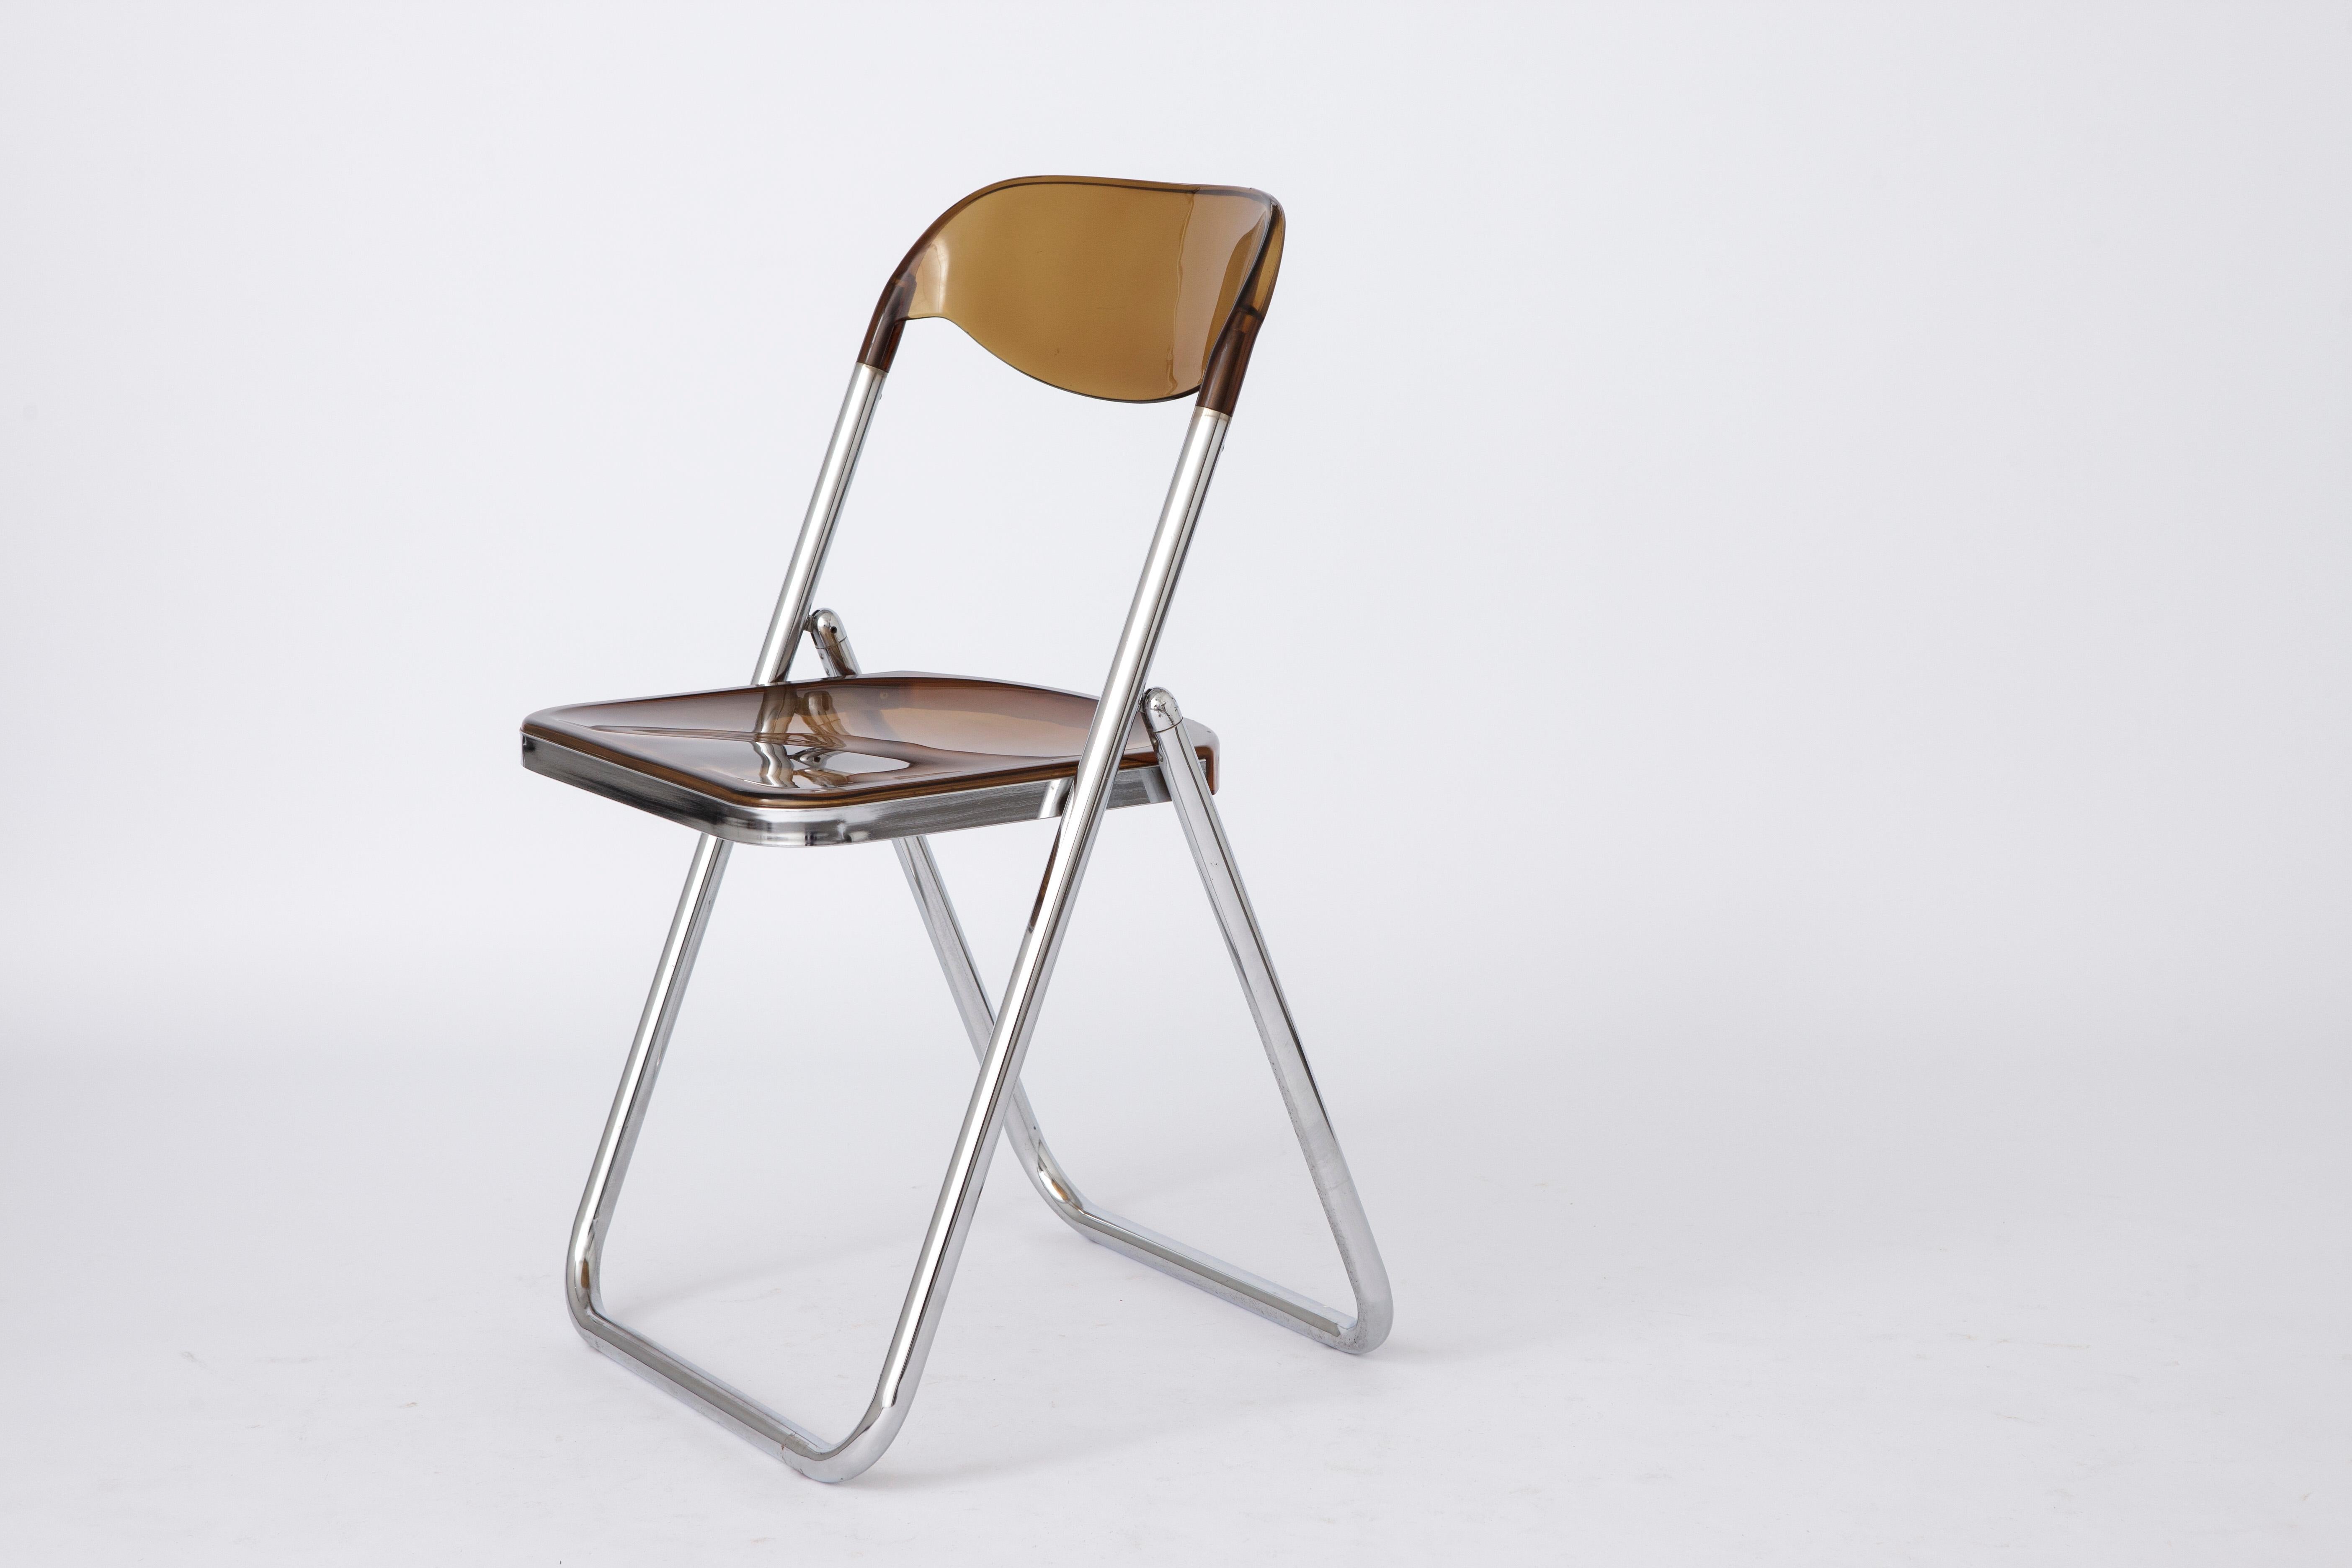 Italian Vintage Folding Chair 1960s-1970s Italy For Sale